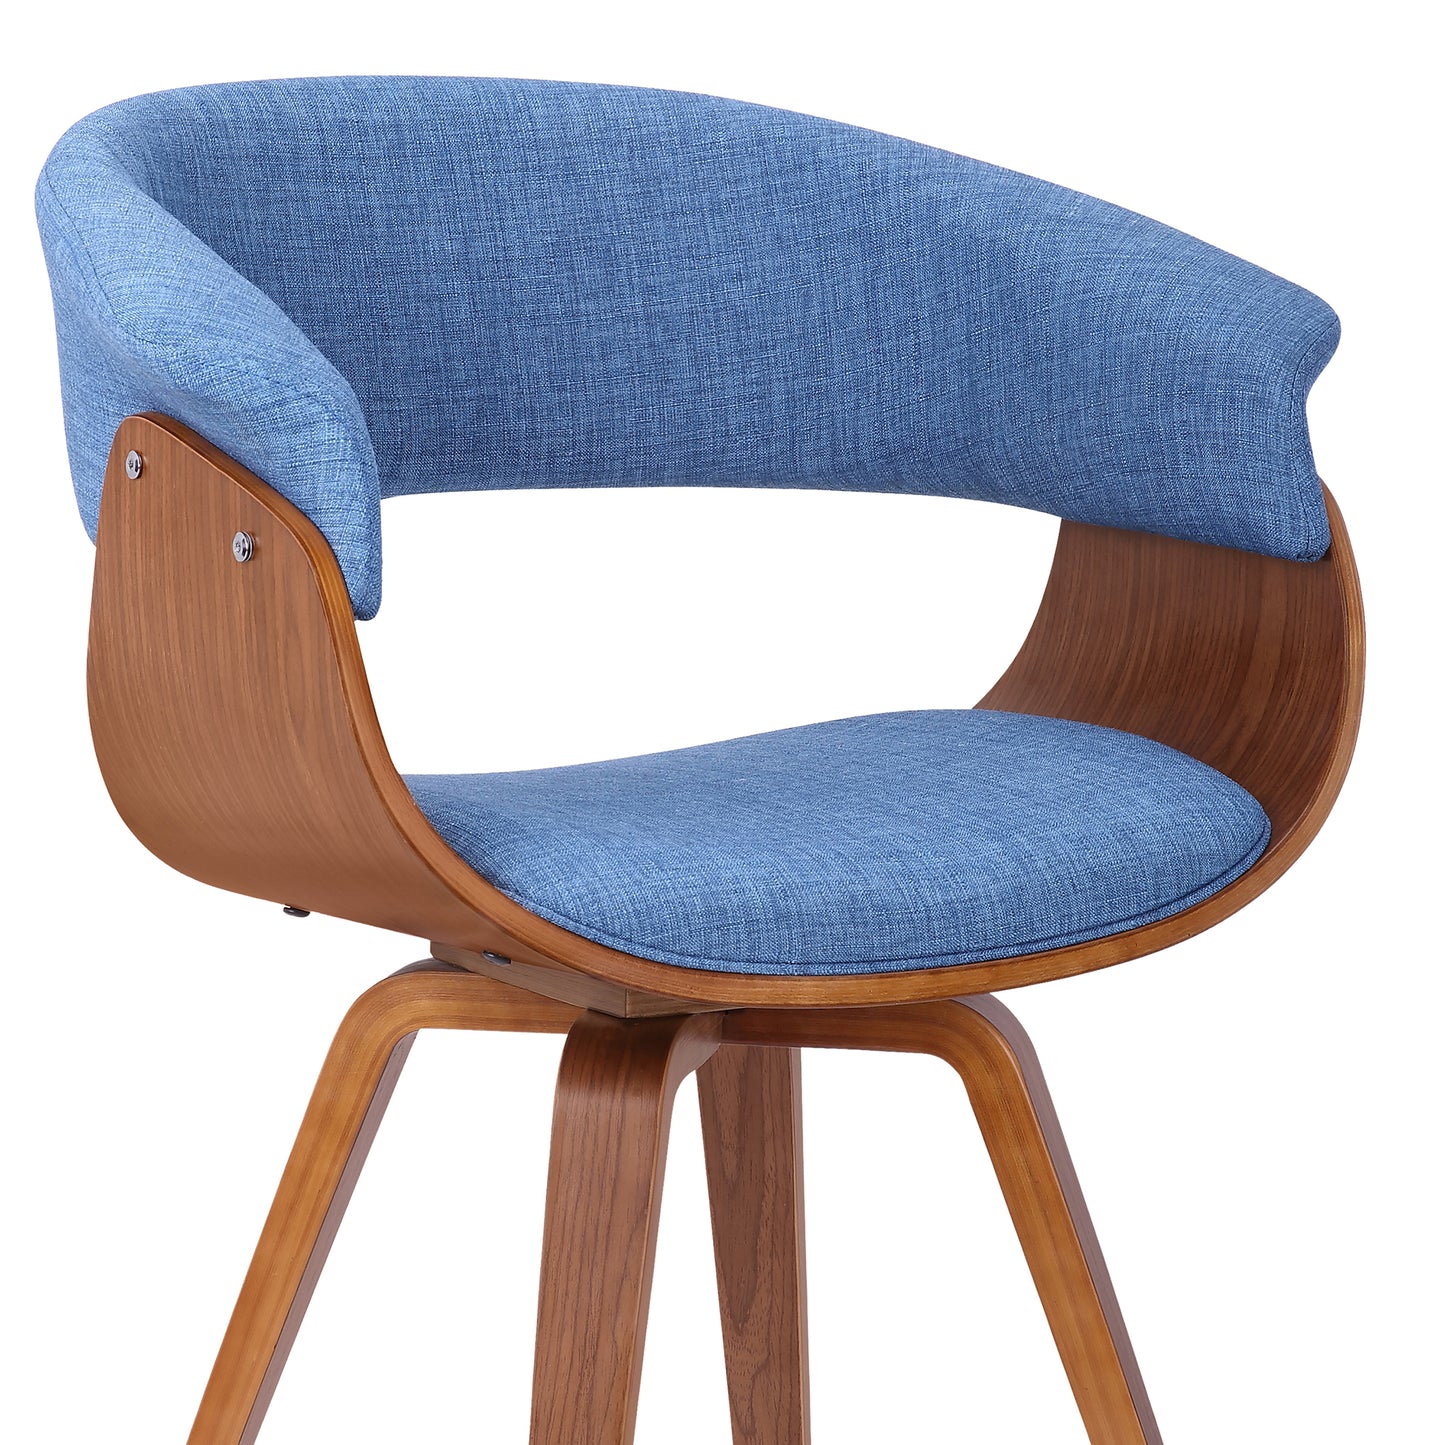 Summer Mid-Century Chair in Blue Fabric with Walnut Wood Finish